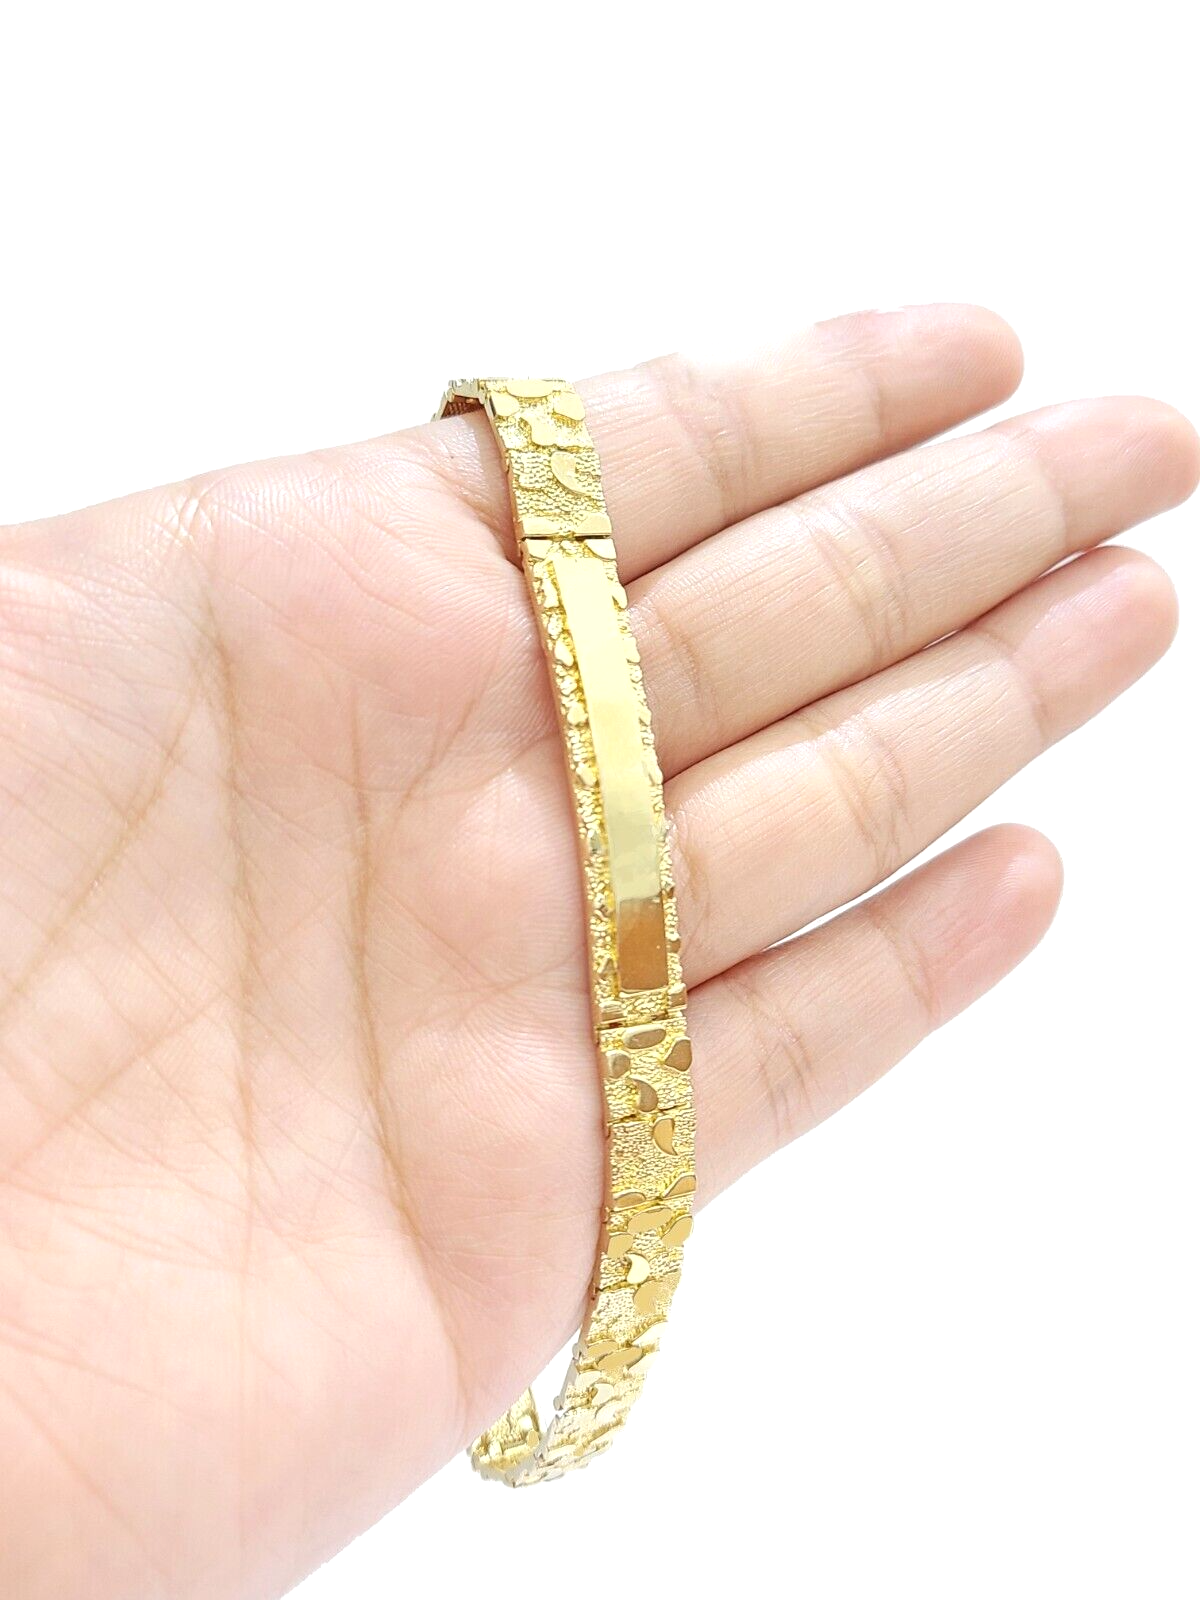 10k Yellow Gold 15mm Nugget Bracelet 8 inches - BVG069 | Nugget bracelet,  Gold nugget ring, Mens gold bracelets